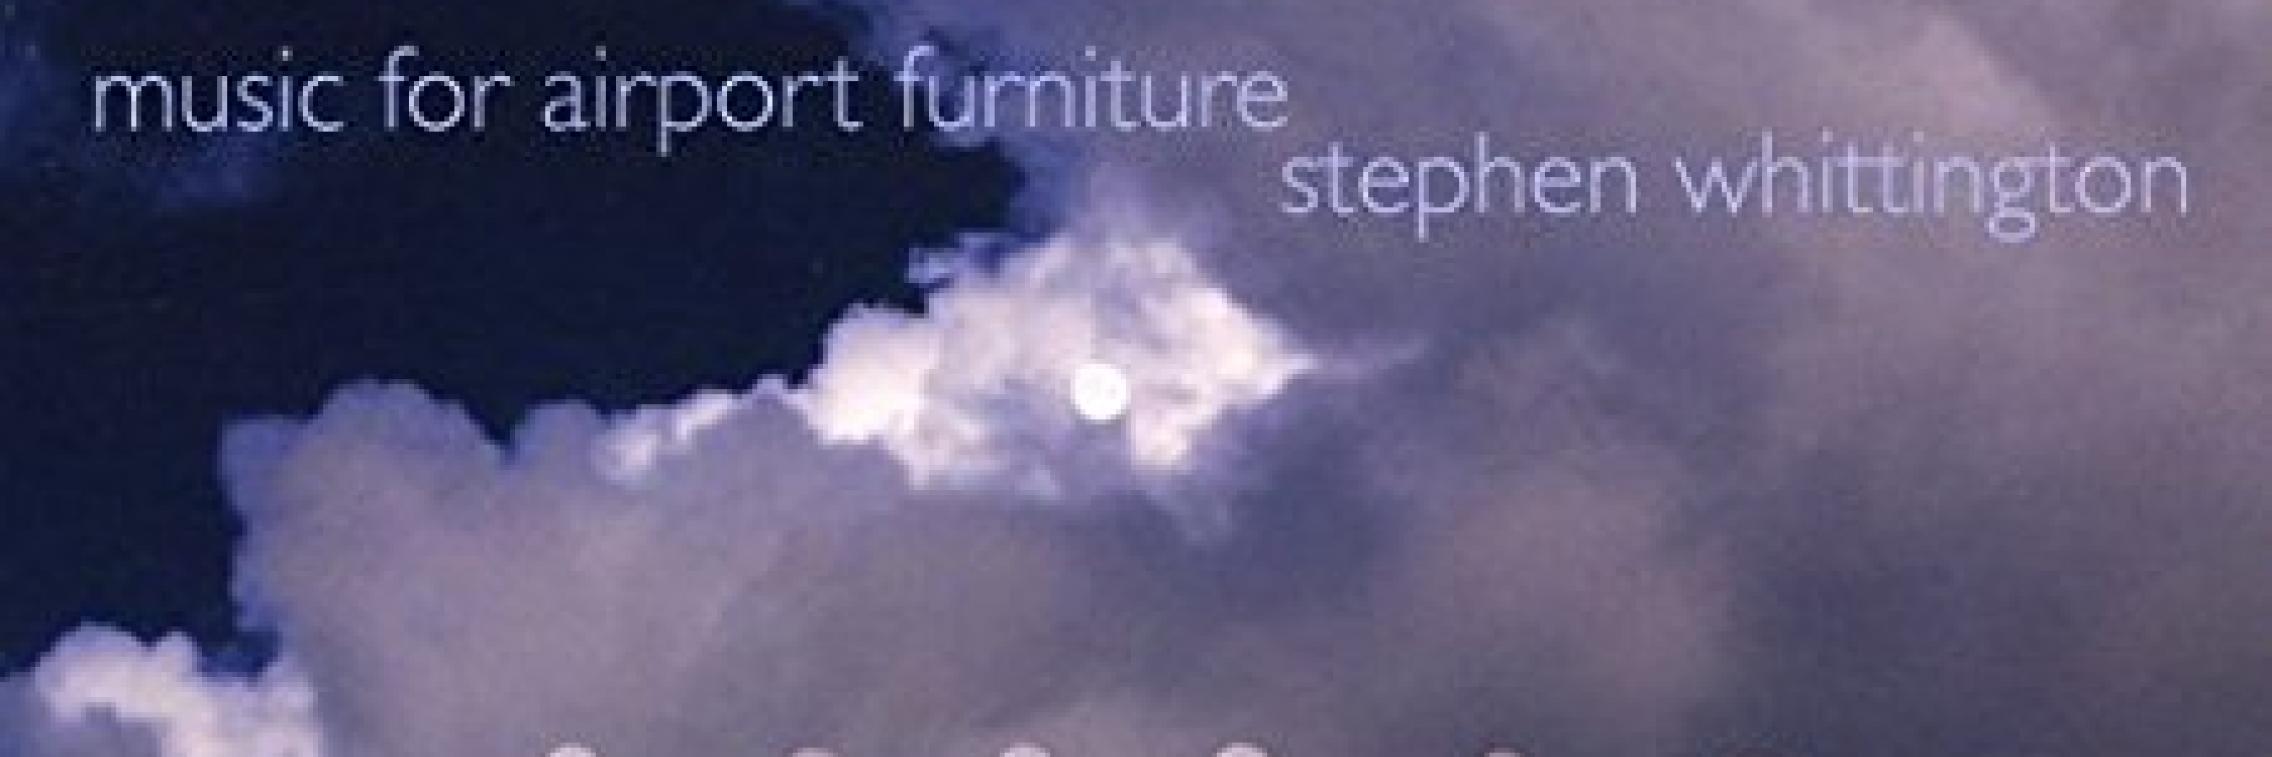 Music for airport furniture